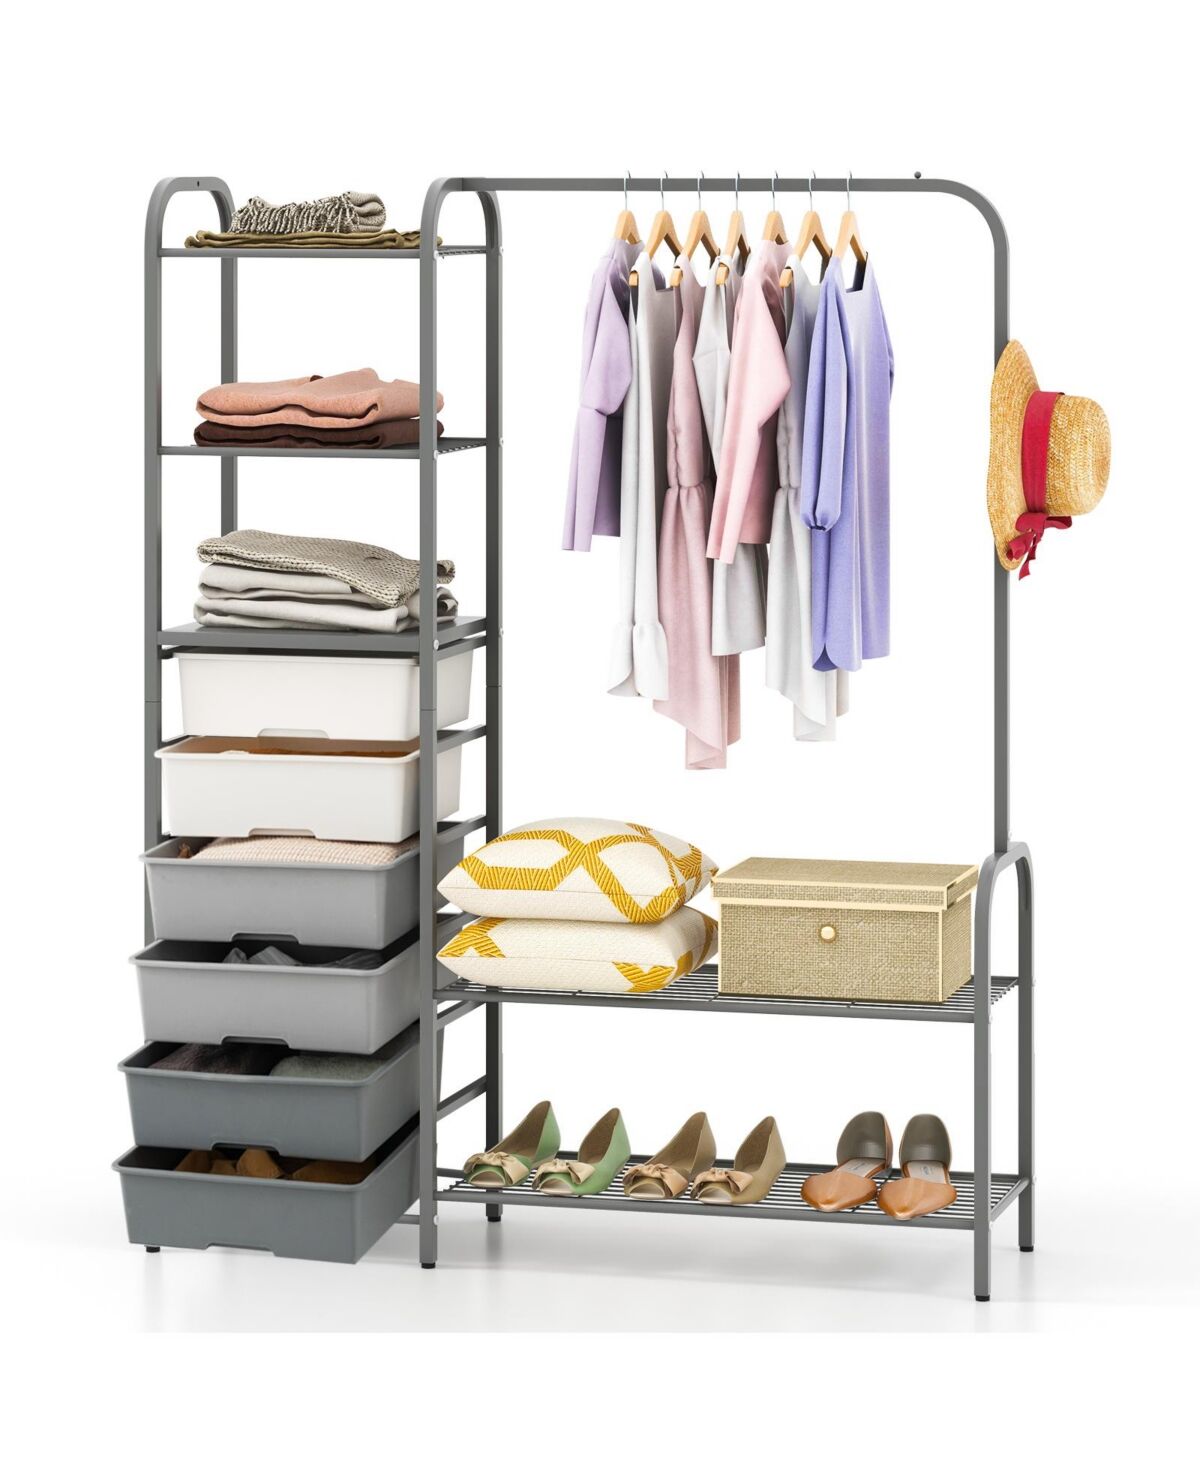 Sugift Free Standing Closet Organizer with Removable Drawers and Shelves-Gray - Grey